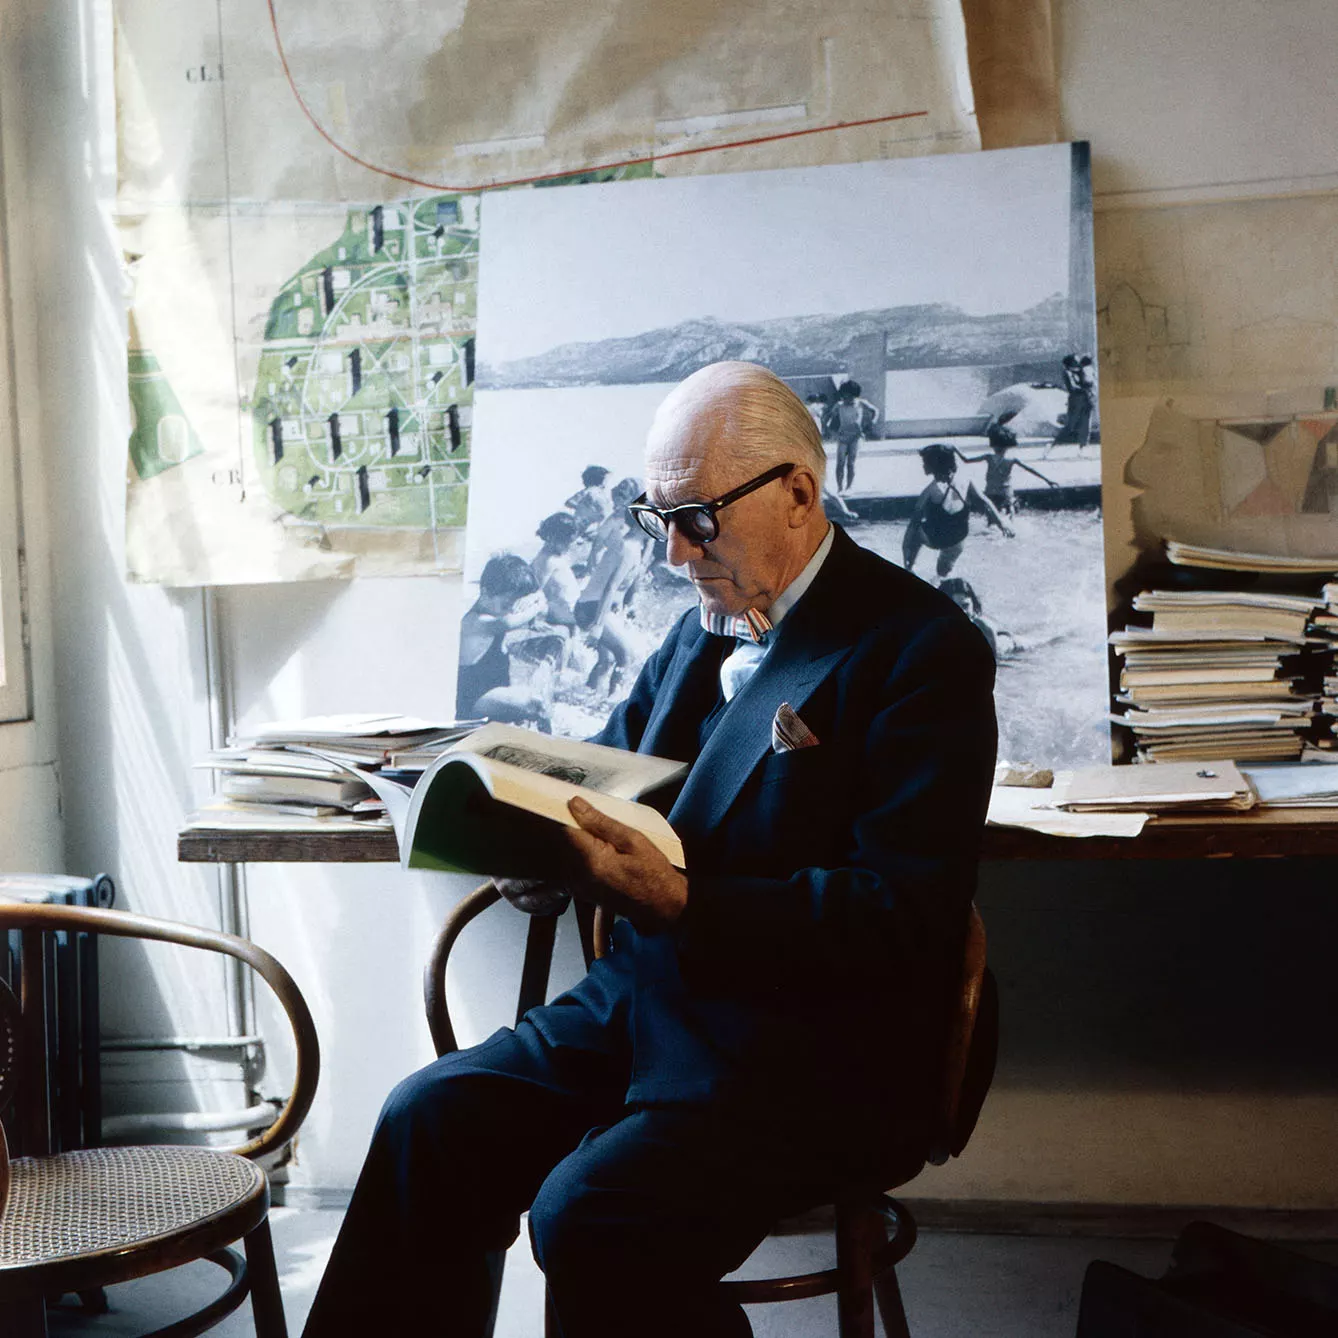 Le Corbusier on his chair